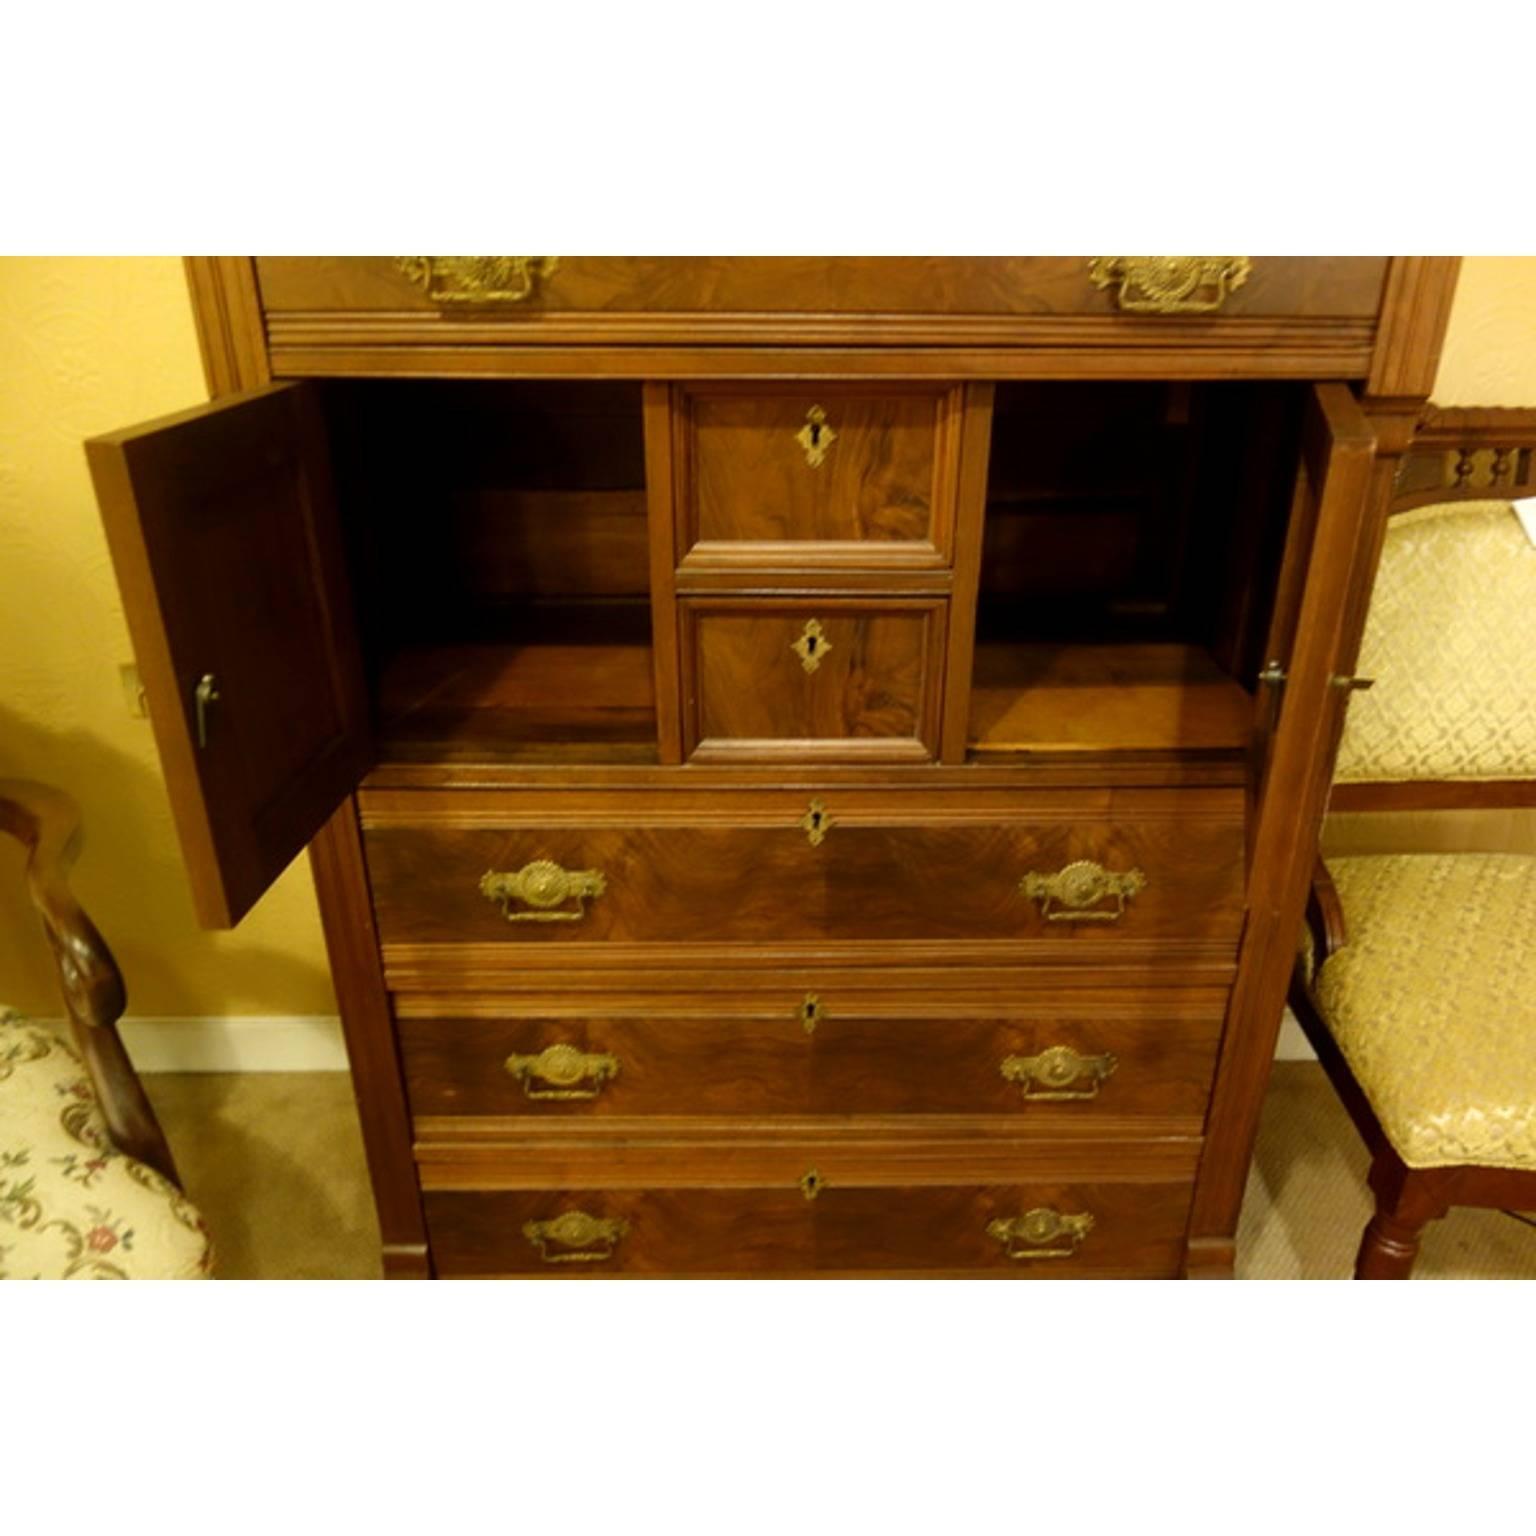 This is a unique piece and it comes with the original key.  I believe that this was a man's vanity dresser.  You would put a bowl with water on one side and shaving utility in the other side.  Very cool dresser and would look great in any room.